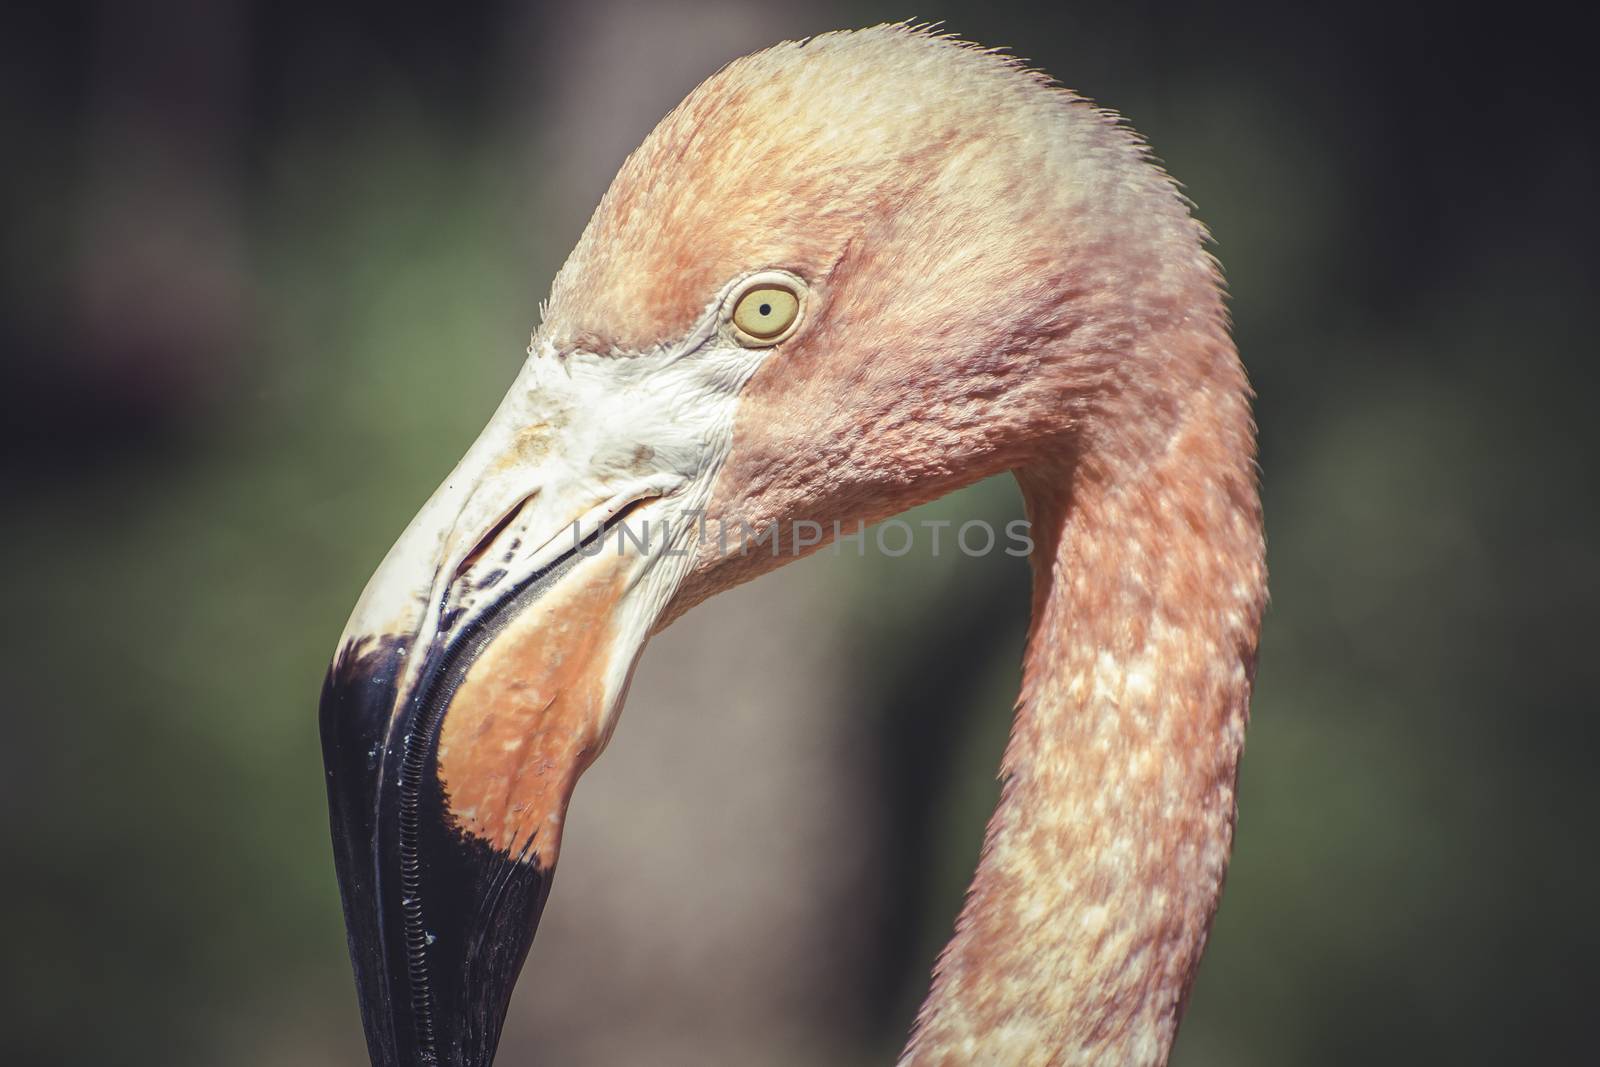 caribbean, detail of flamingo head with long neck